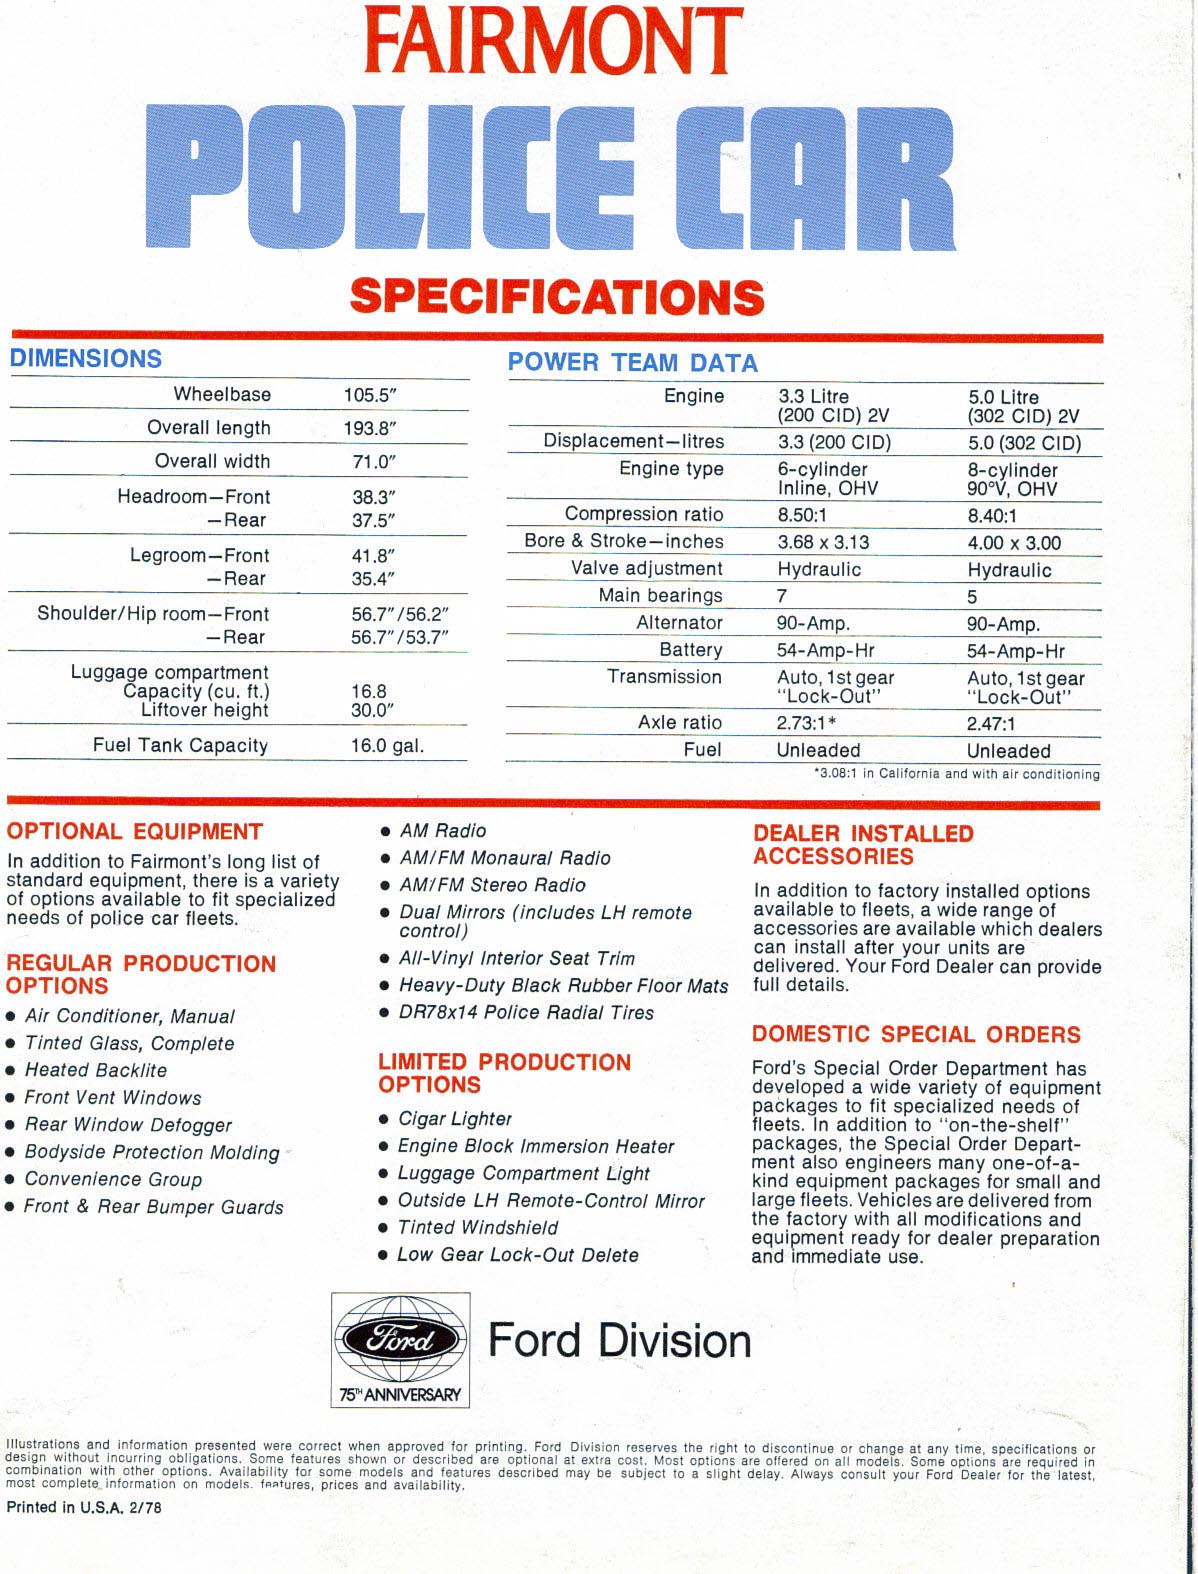 1978 Ford Fairmont Police Car Folder Page 3